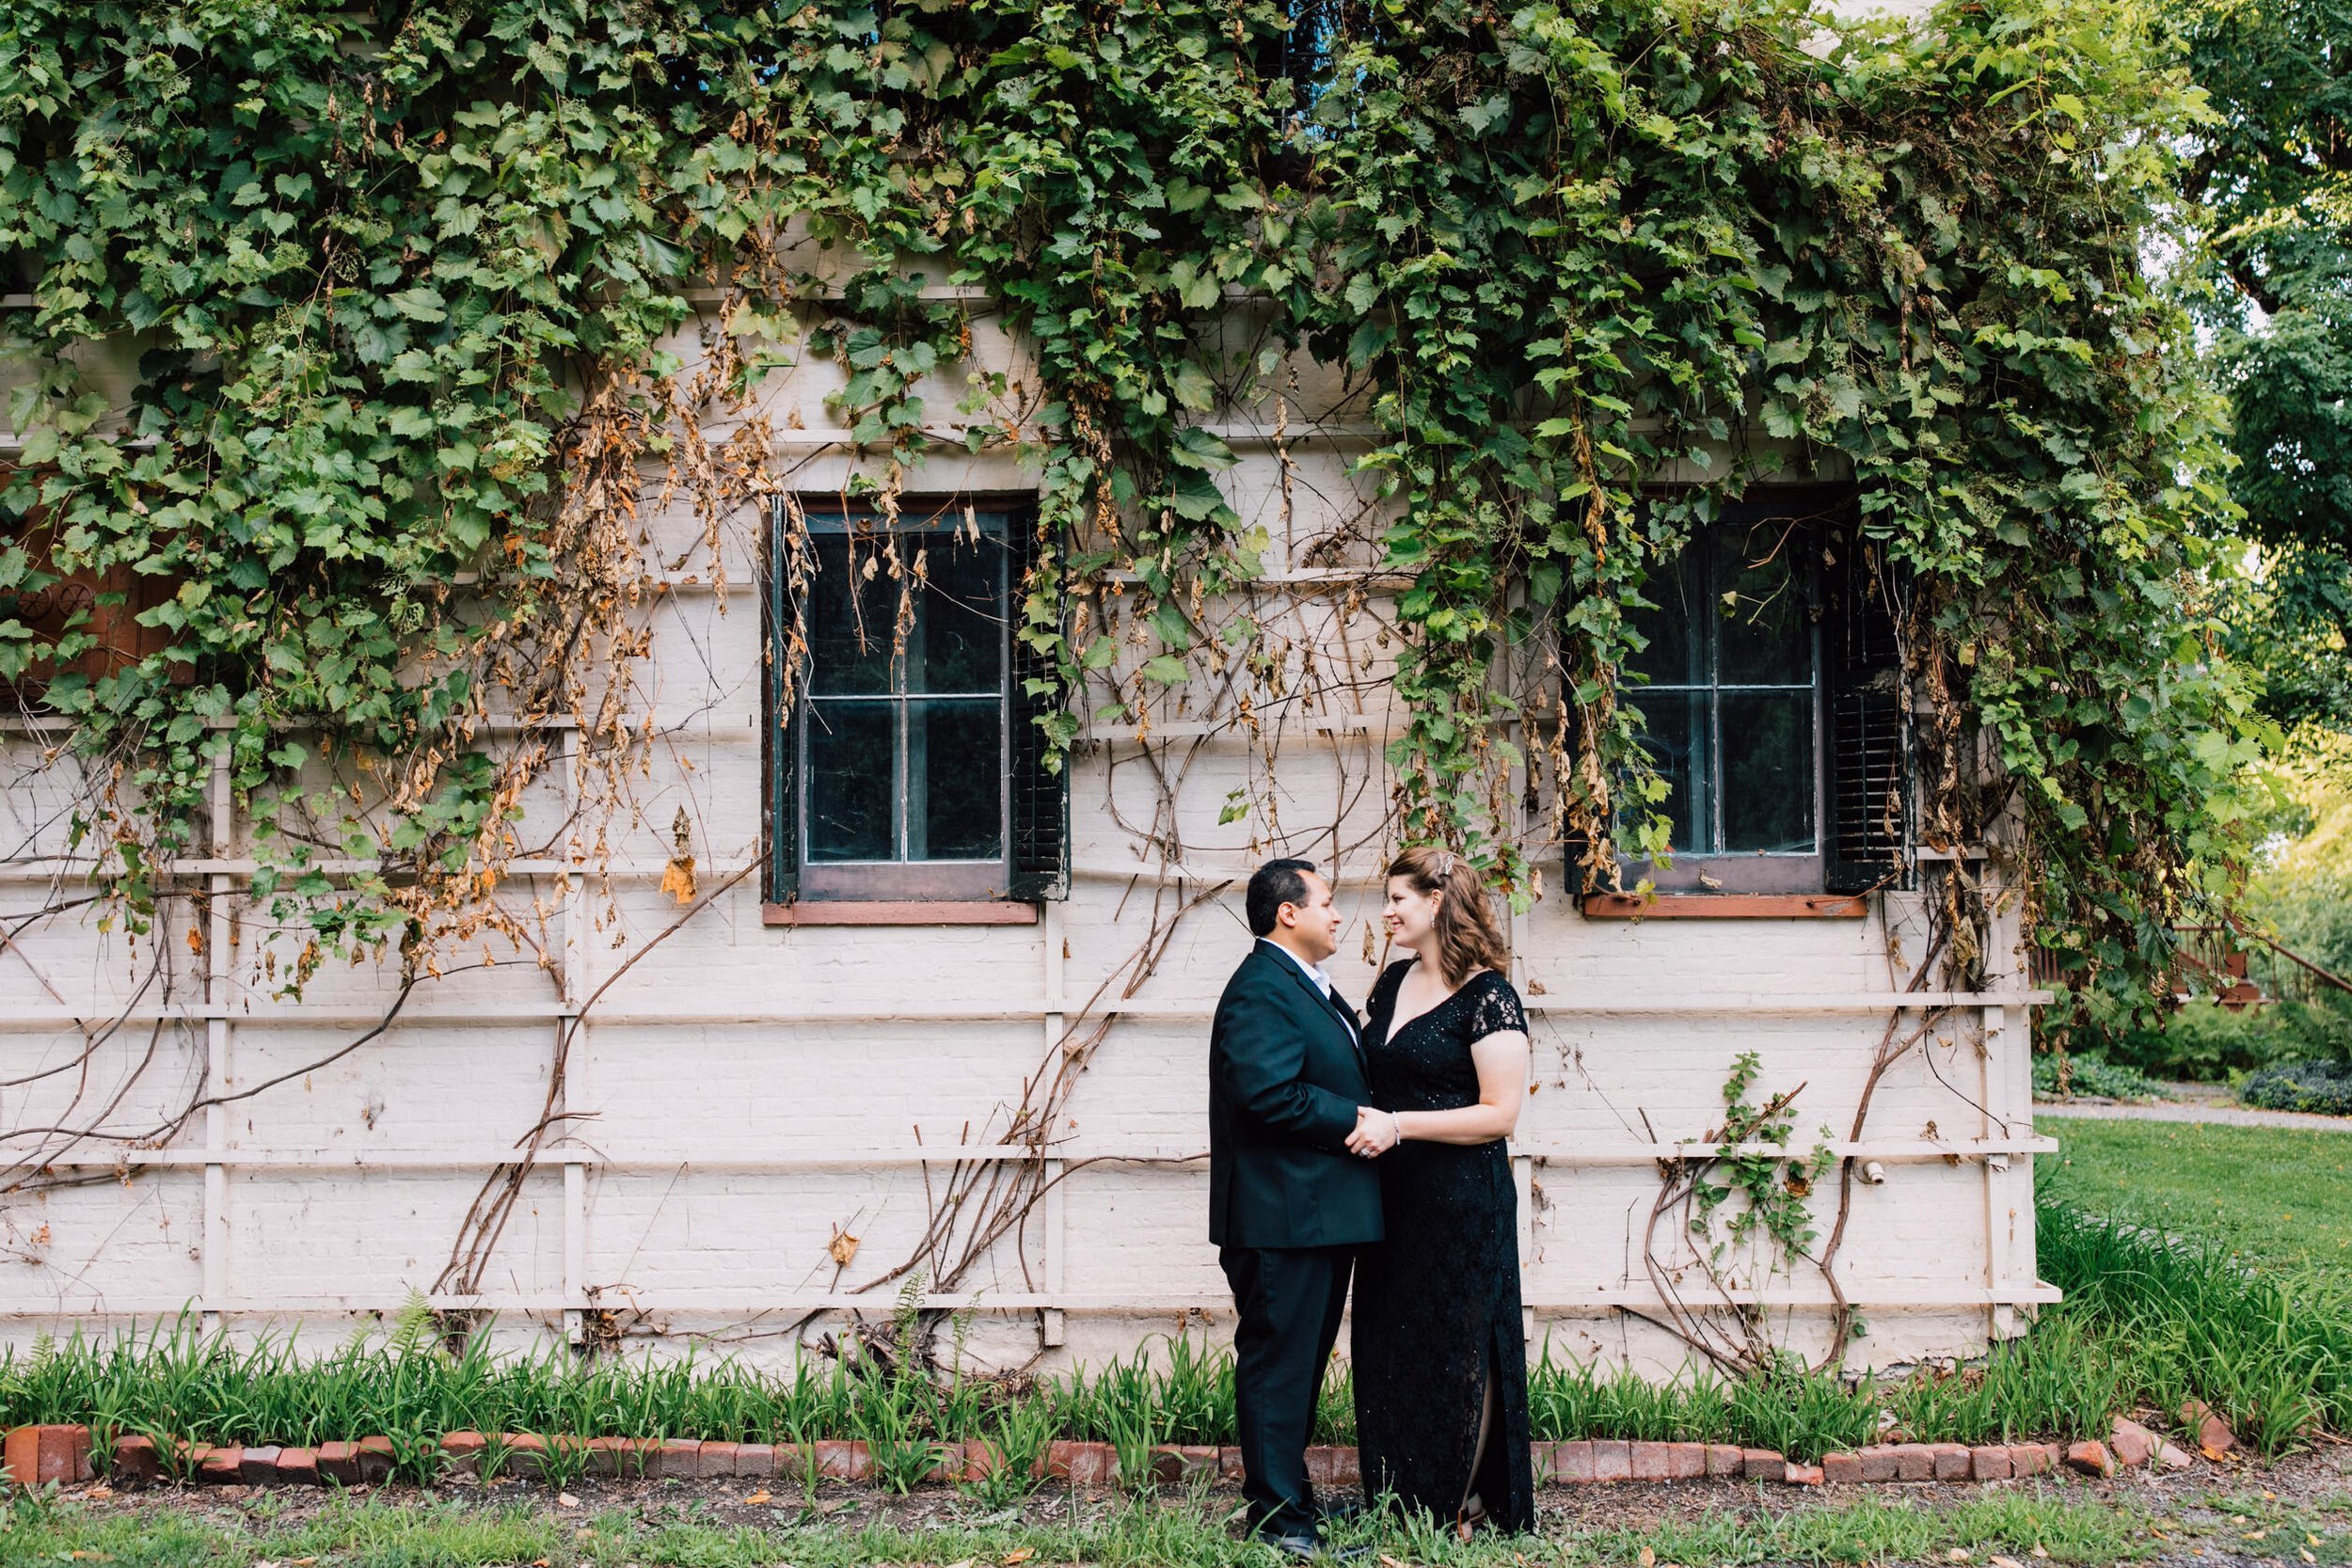  Married couple beam at each other as they stand in front of a building on the site of Lorenzo state historic site 